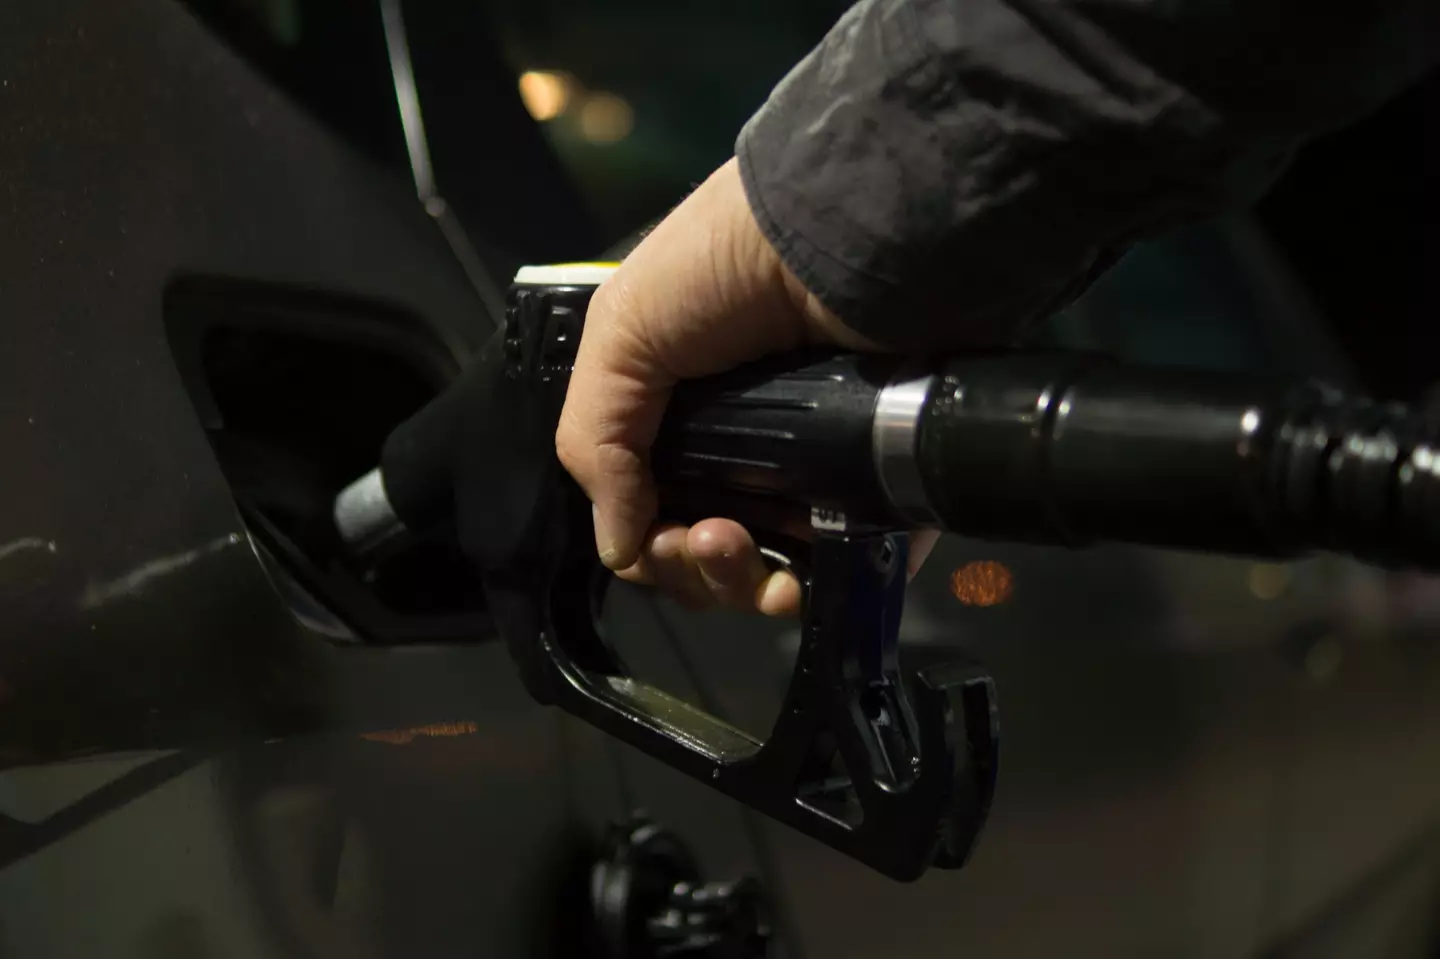 The cheapest place to fill up your car has been revealed.